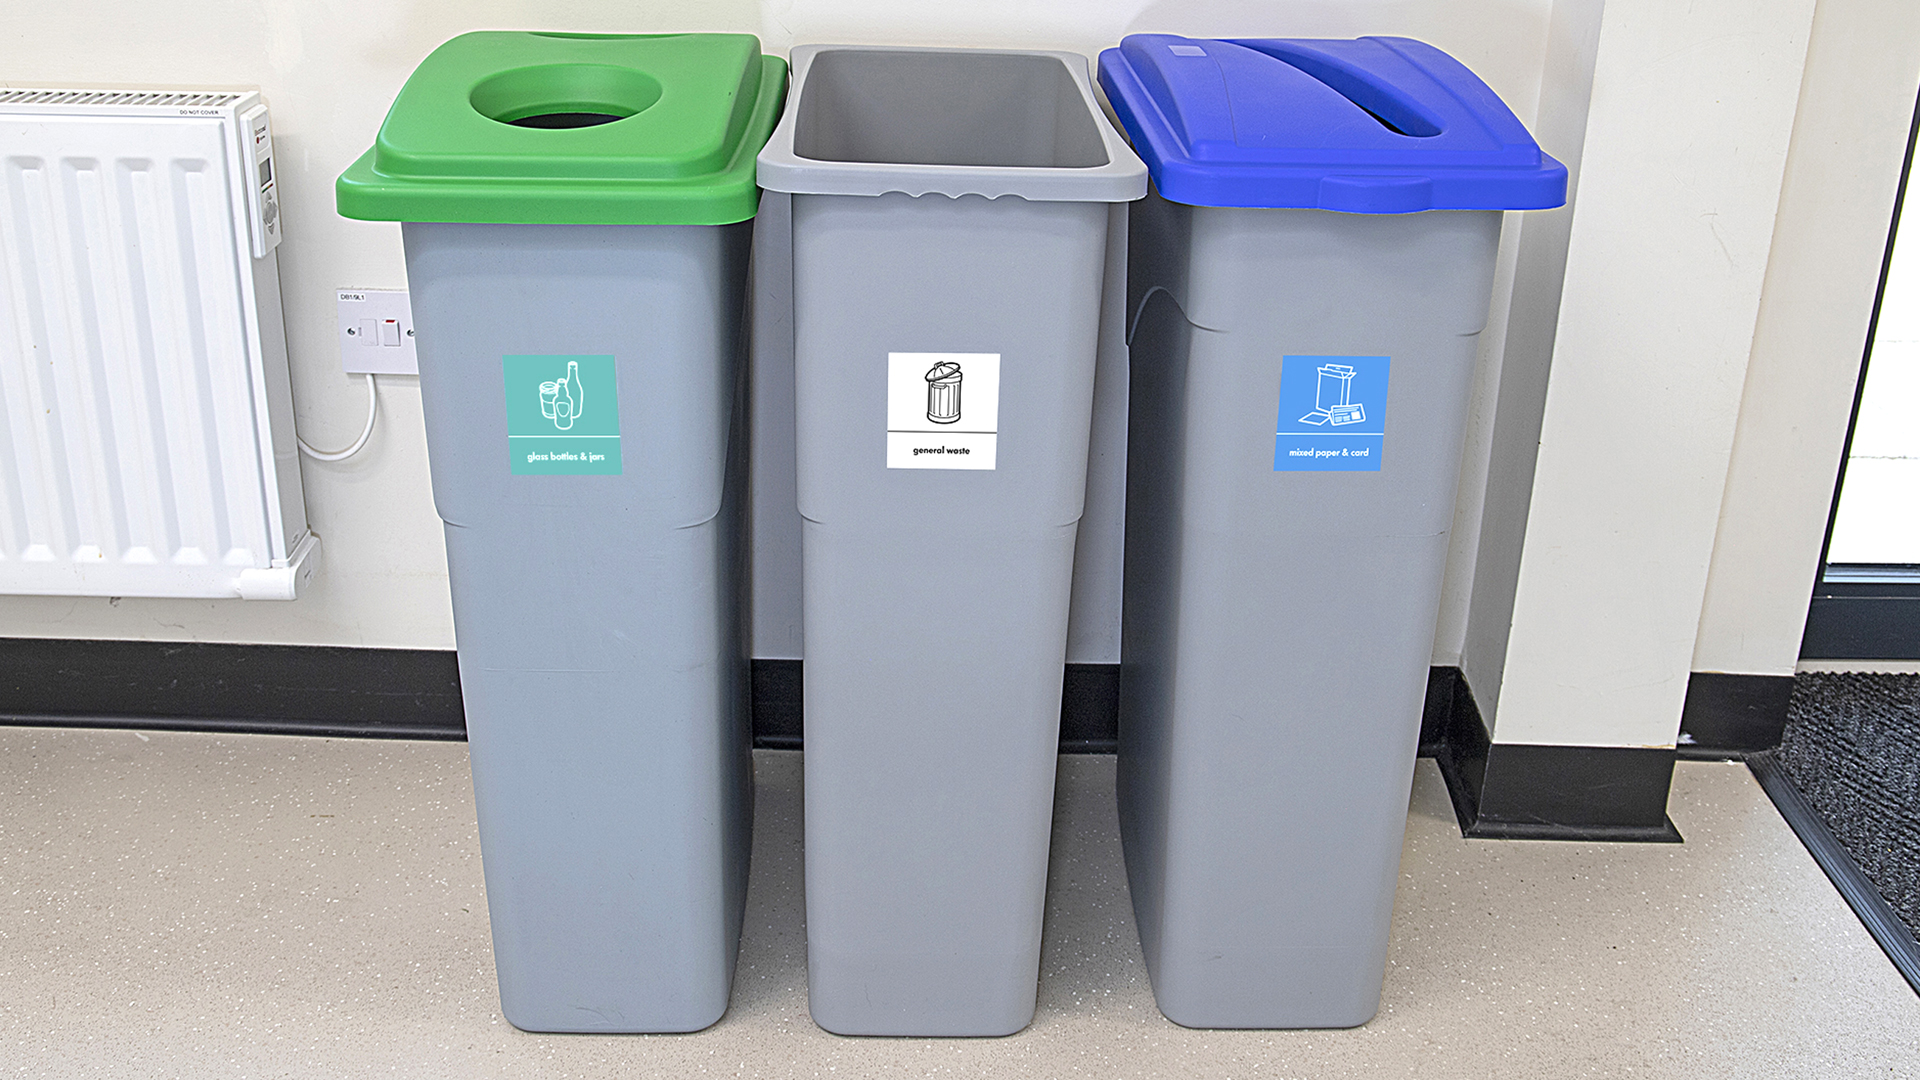 Recycling waste products designed for changes in legislation